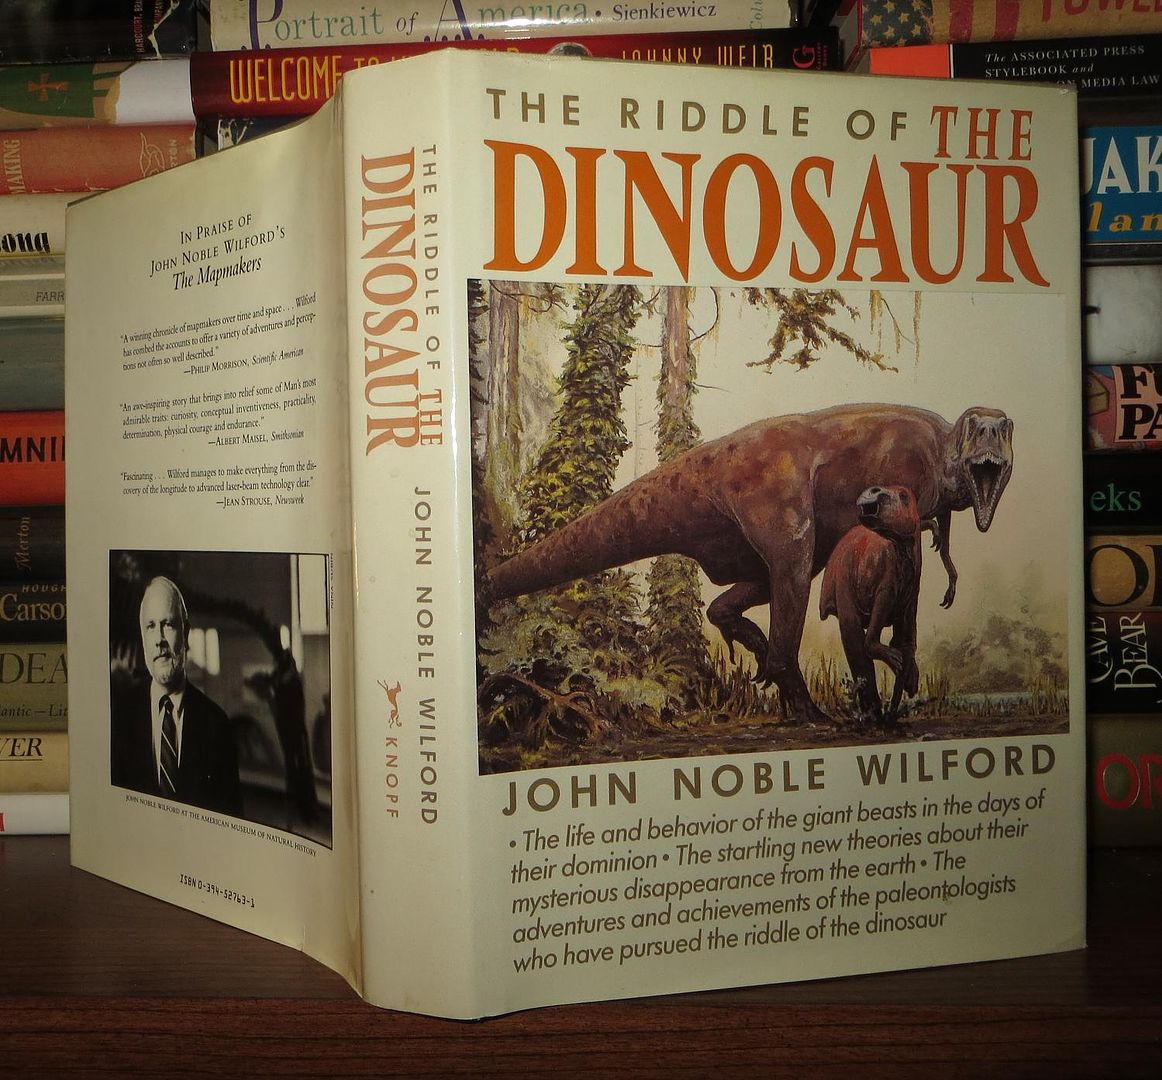 WILFORD, JOHN NOBLE - The Riddle of the Dinosaur